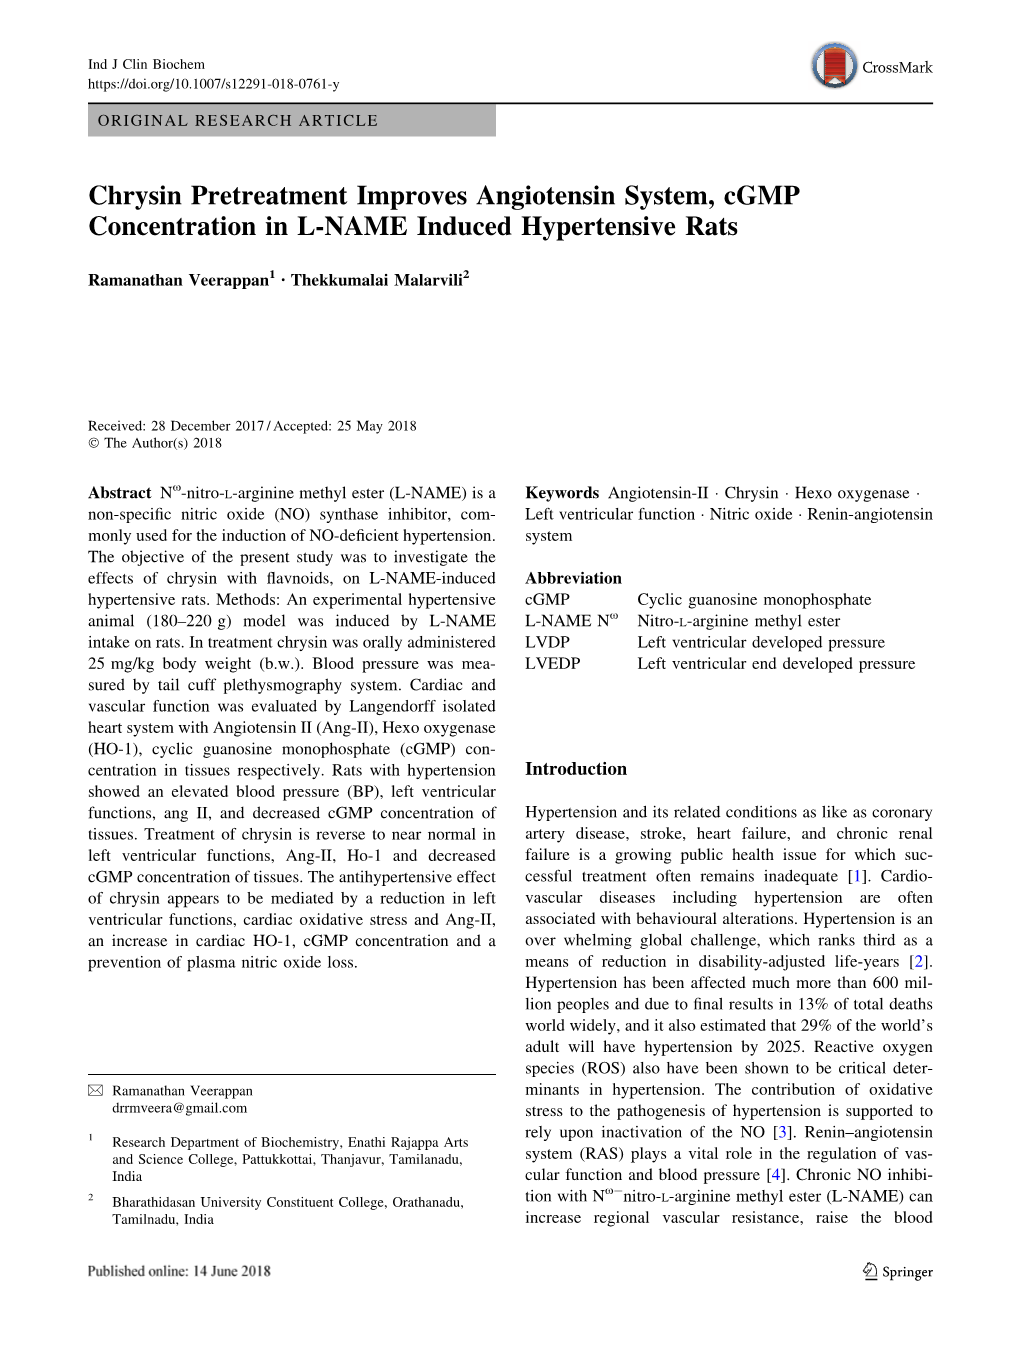 Chrysin Pretreatment Improves Angiotensin System, Cgmp Concentration in L-NAME Induced Hypertensive Rats